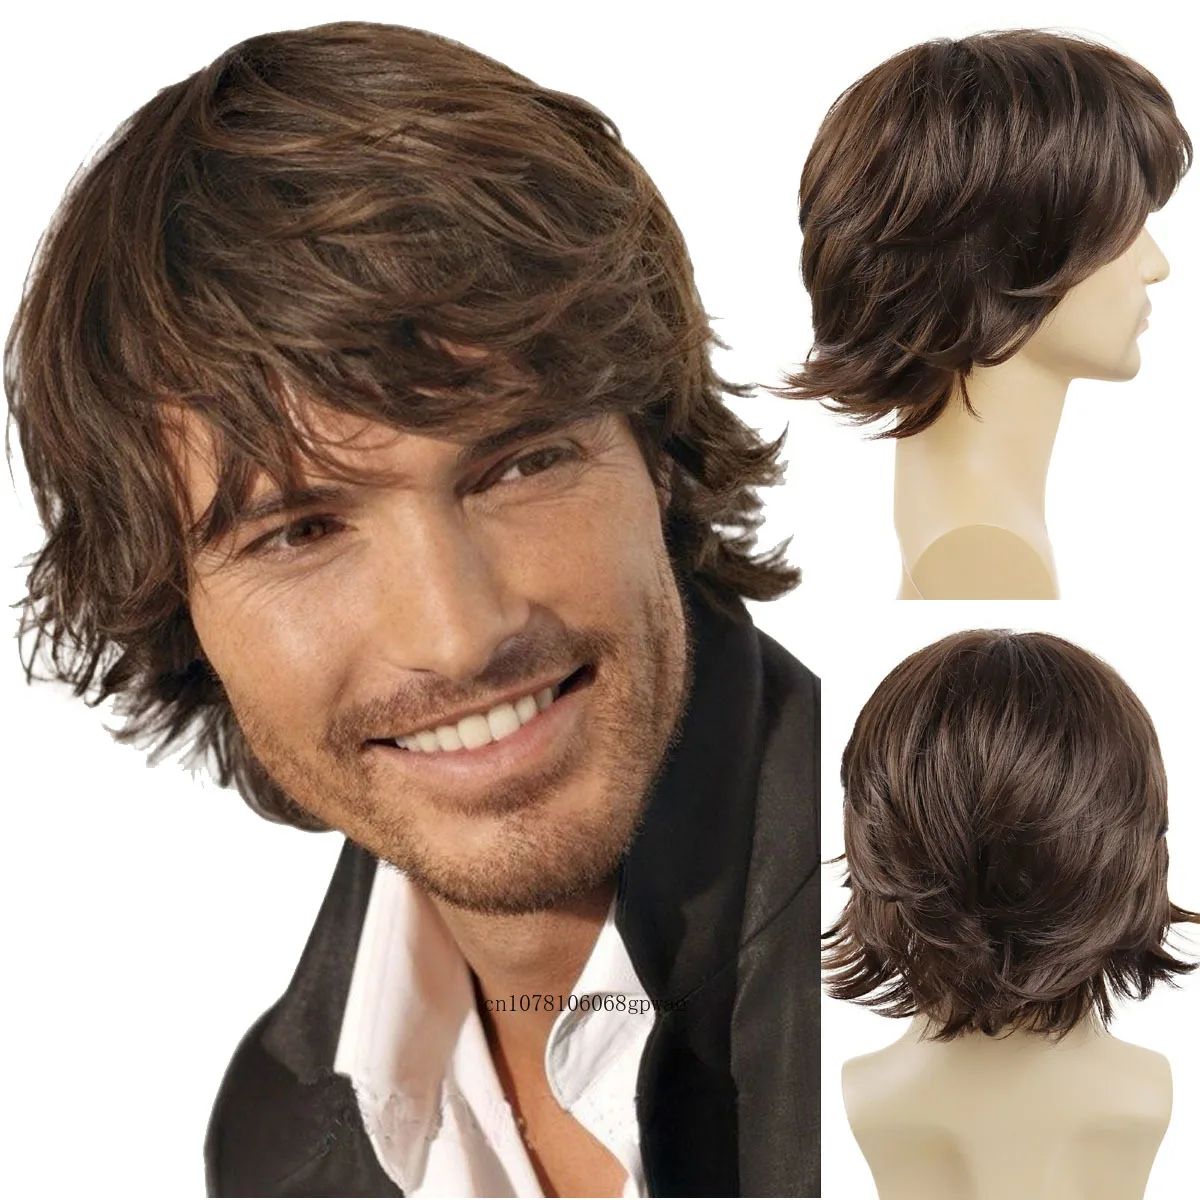 Brown Wigs for Men Synthetic Short Wig with Bangs Wave Haircut Shaggy Hair Tail Daily Male Wig Heat Resistant Adjustable Cap виброхвост helios shaggy